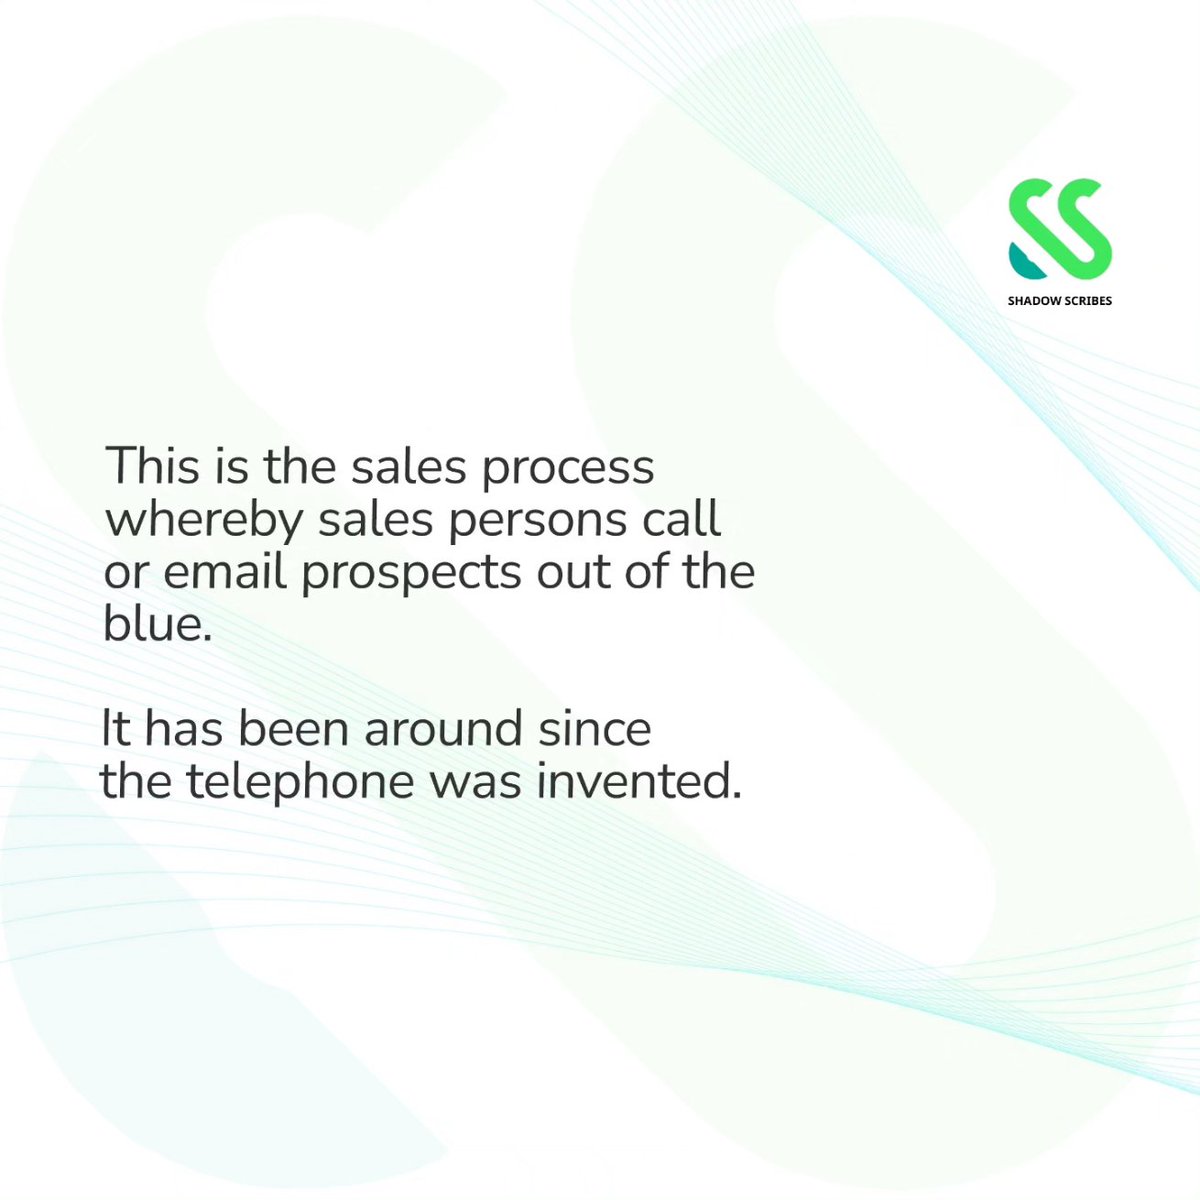 It is important to respect who you are calling, offer value as a brand, and also perfect your cold emails.

Shadow Scribes offers the best and least annoying cold-calling and email marketing services for conversion sake. Will you be working with us today?